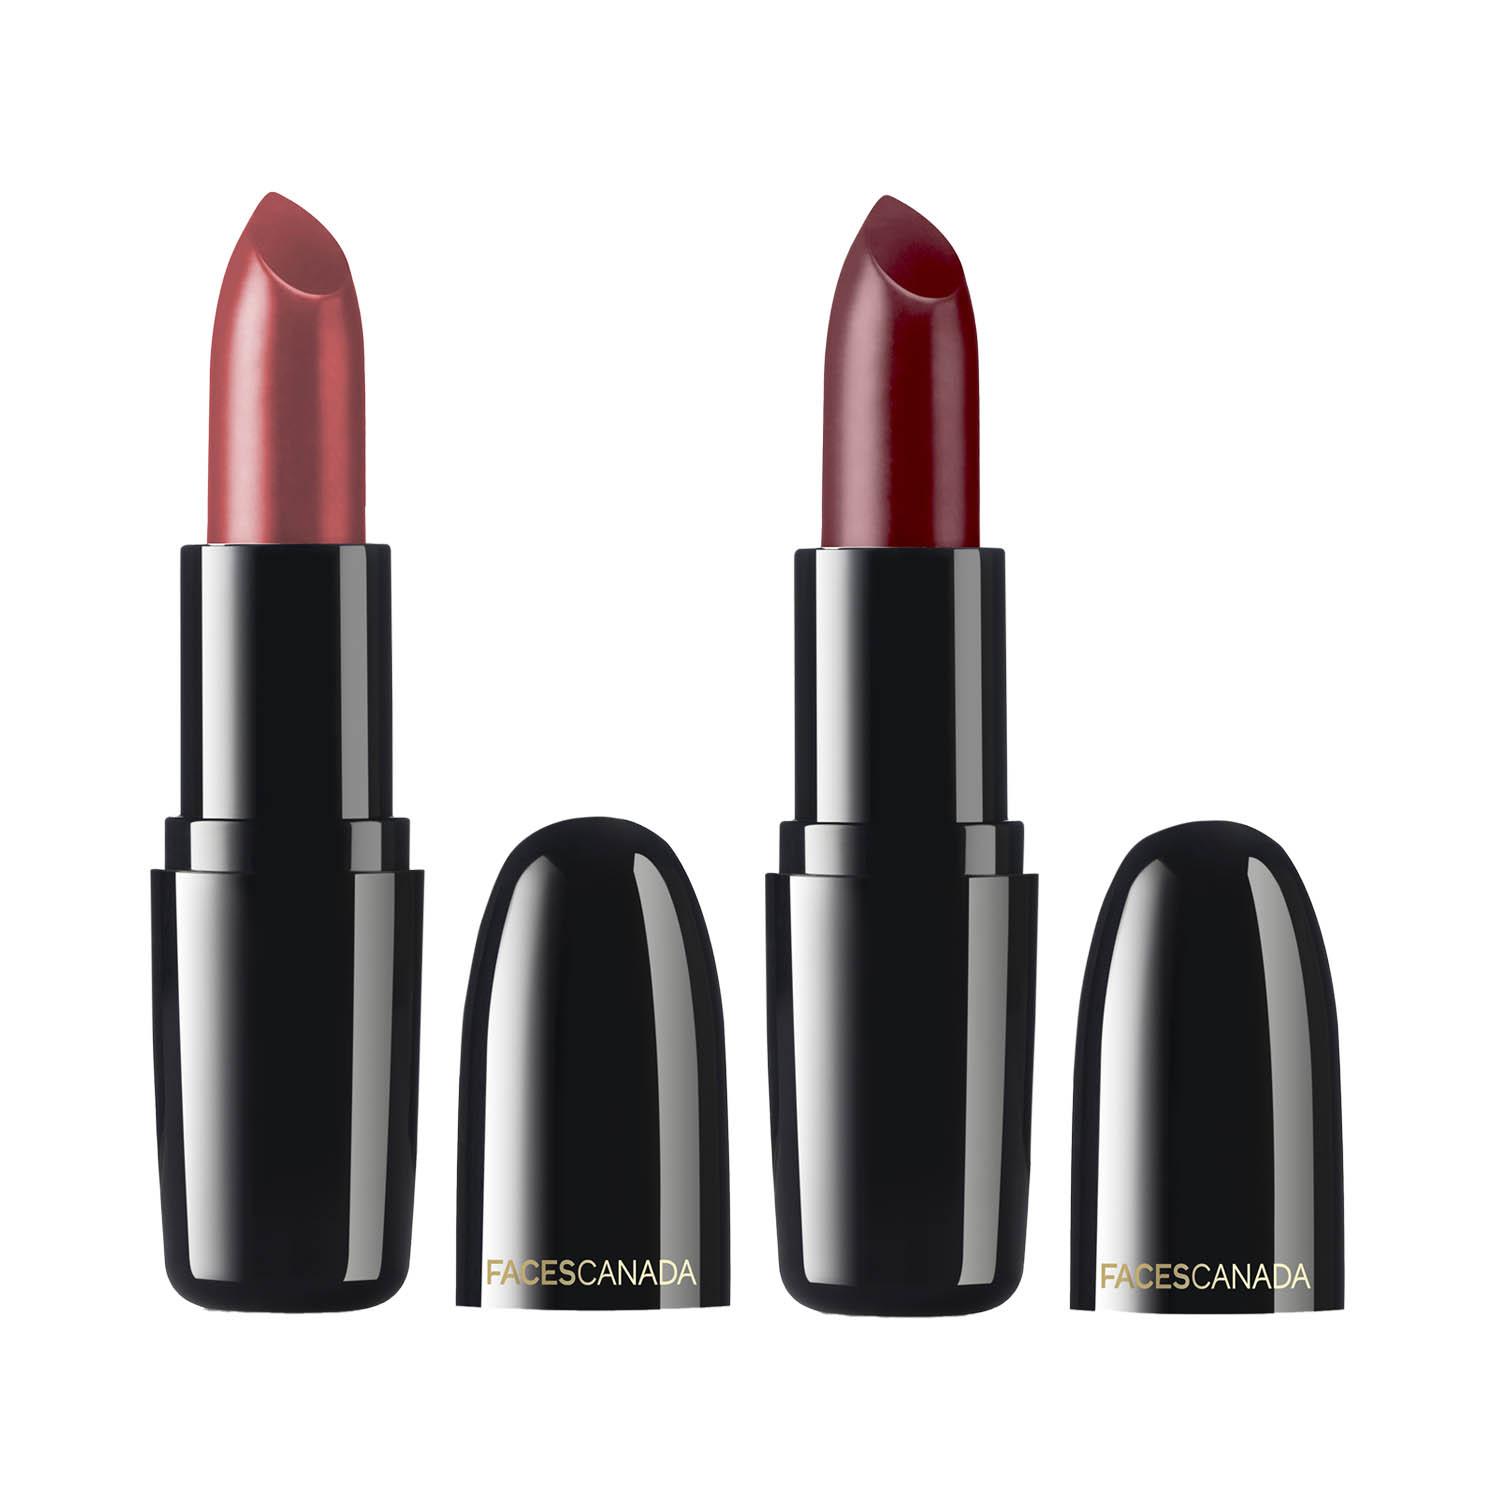 Faces Canada | Faces Canada Weightless Creme Finish Lipstick - Love Nude and Burgundy (4g x 2) Combo